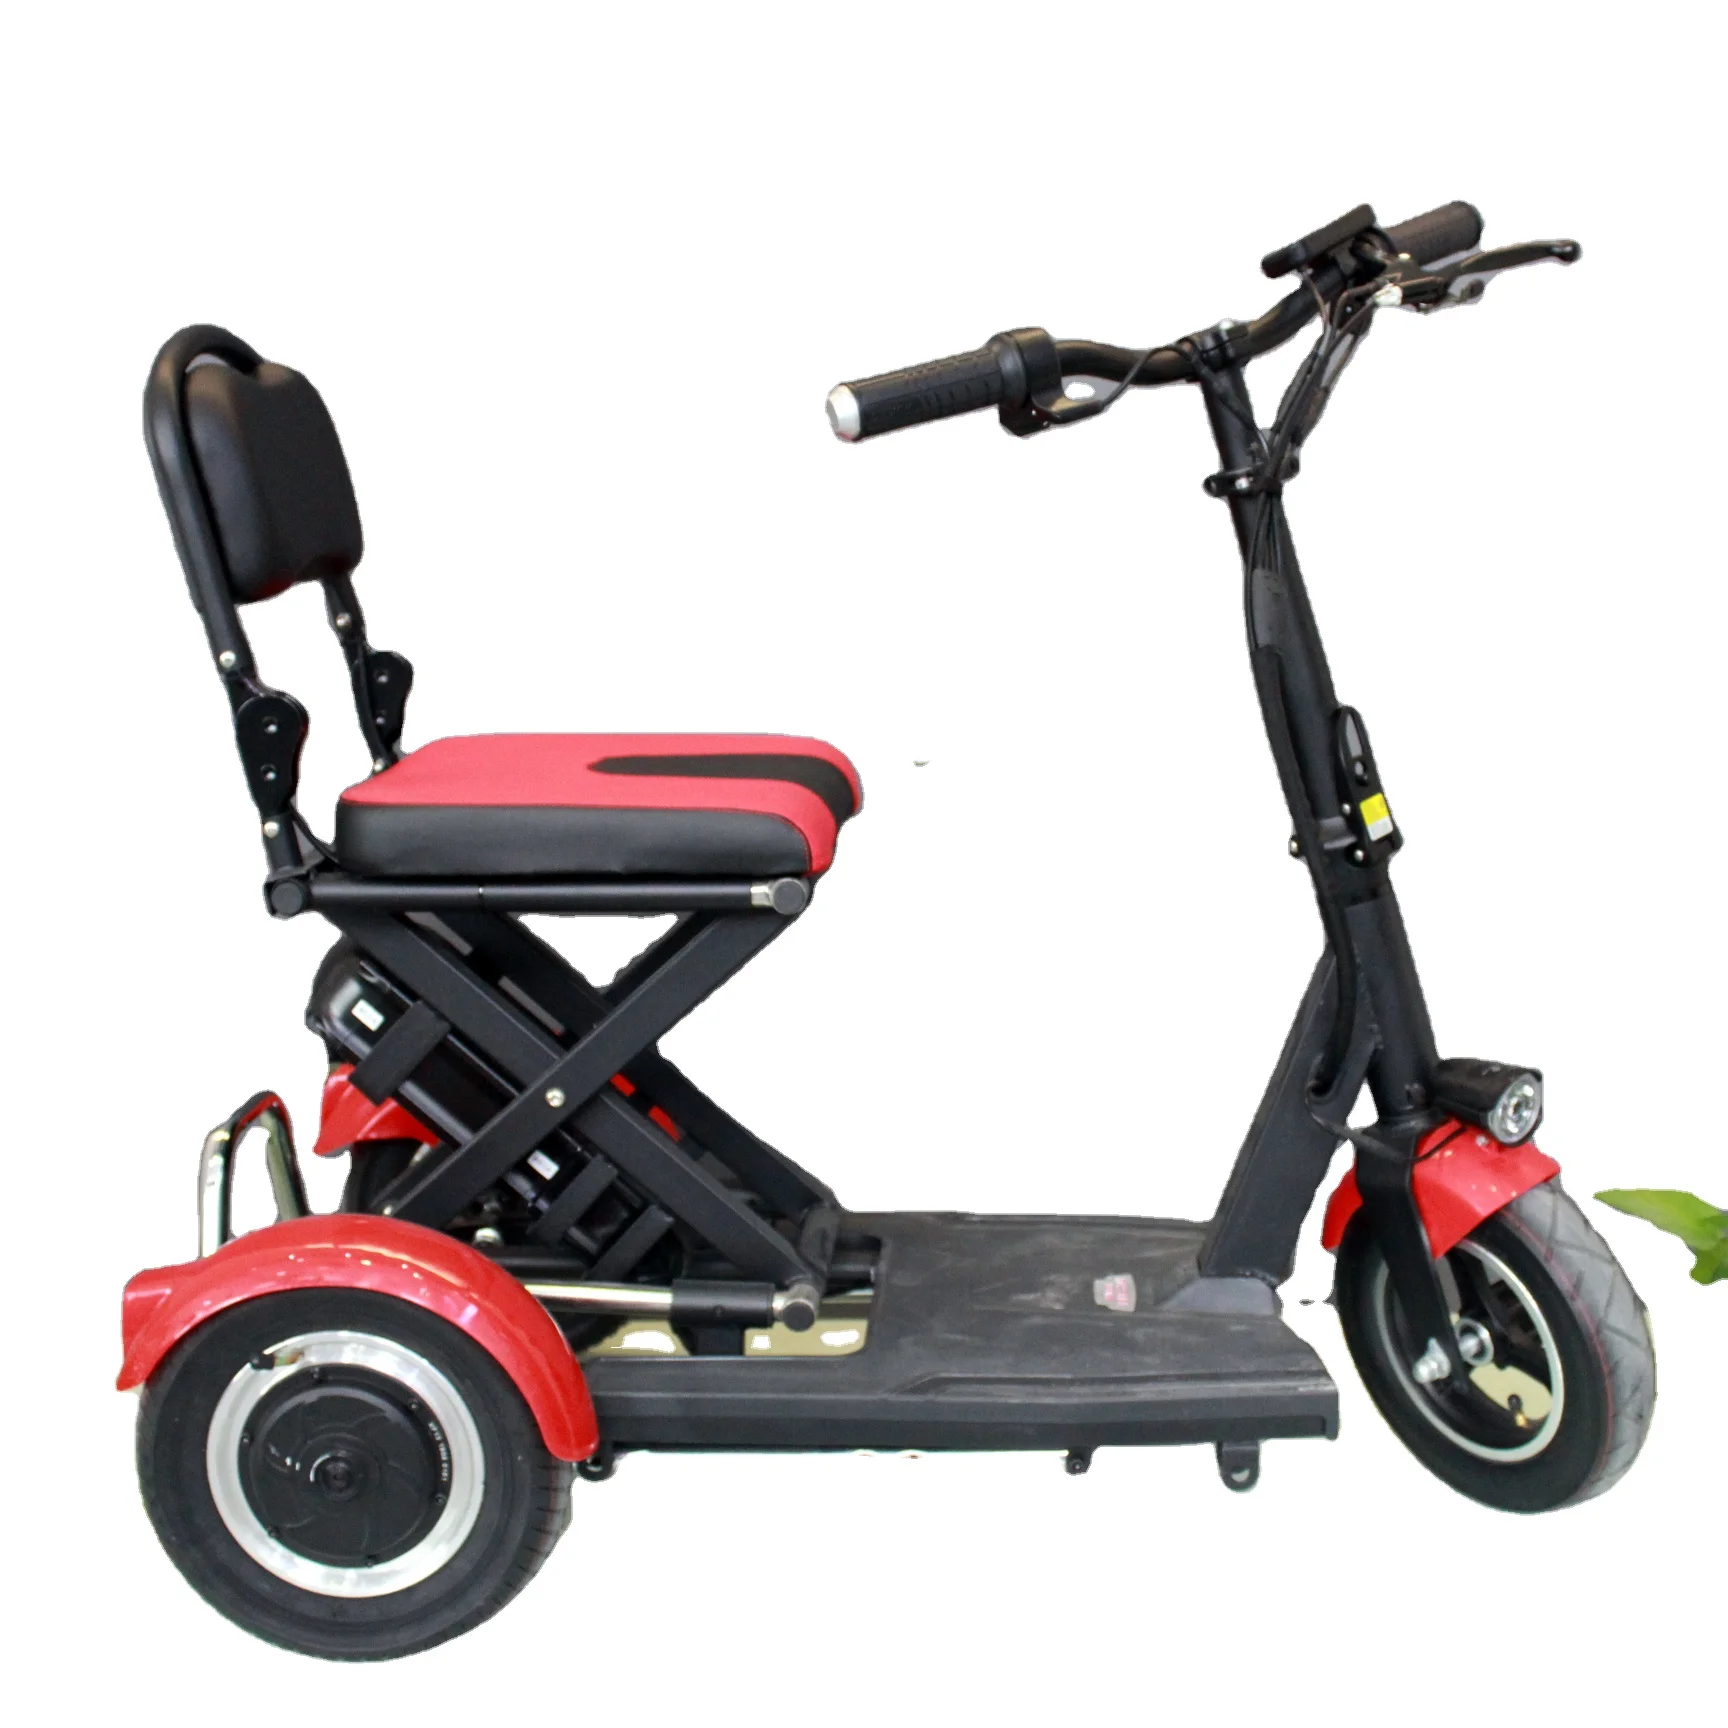 Electric Scooter Folding Type For Elderly And Disabled Handicapped Scooters 36v/48v 10Ah Lithium Battery Motor Scooter custom gogobest gm26 electric bike 36v 250w motor 25km h max speed 10ah battery 50 60km range 27 5 2 25 cst tires silver